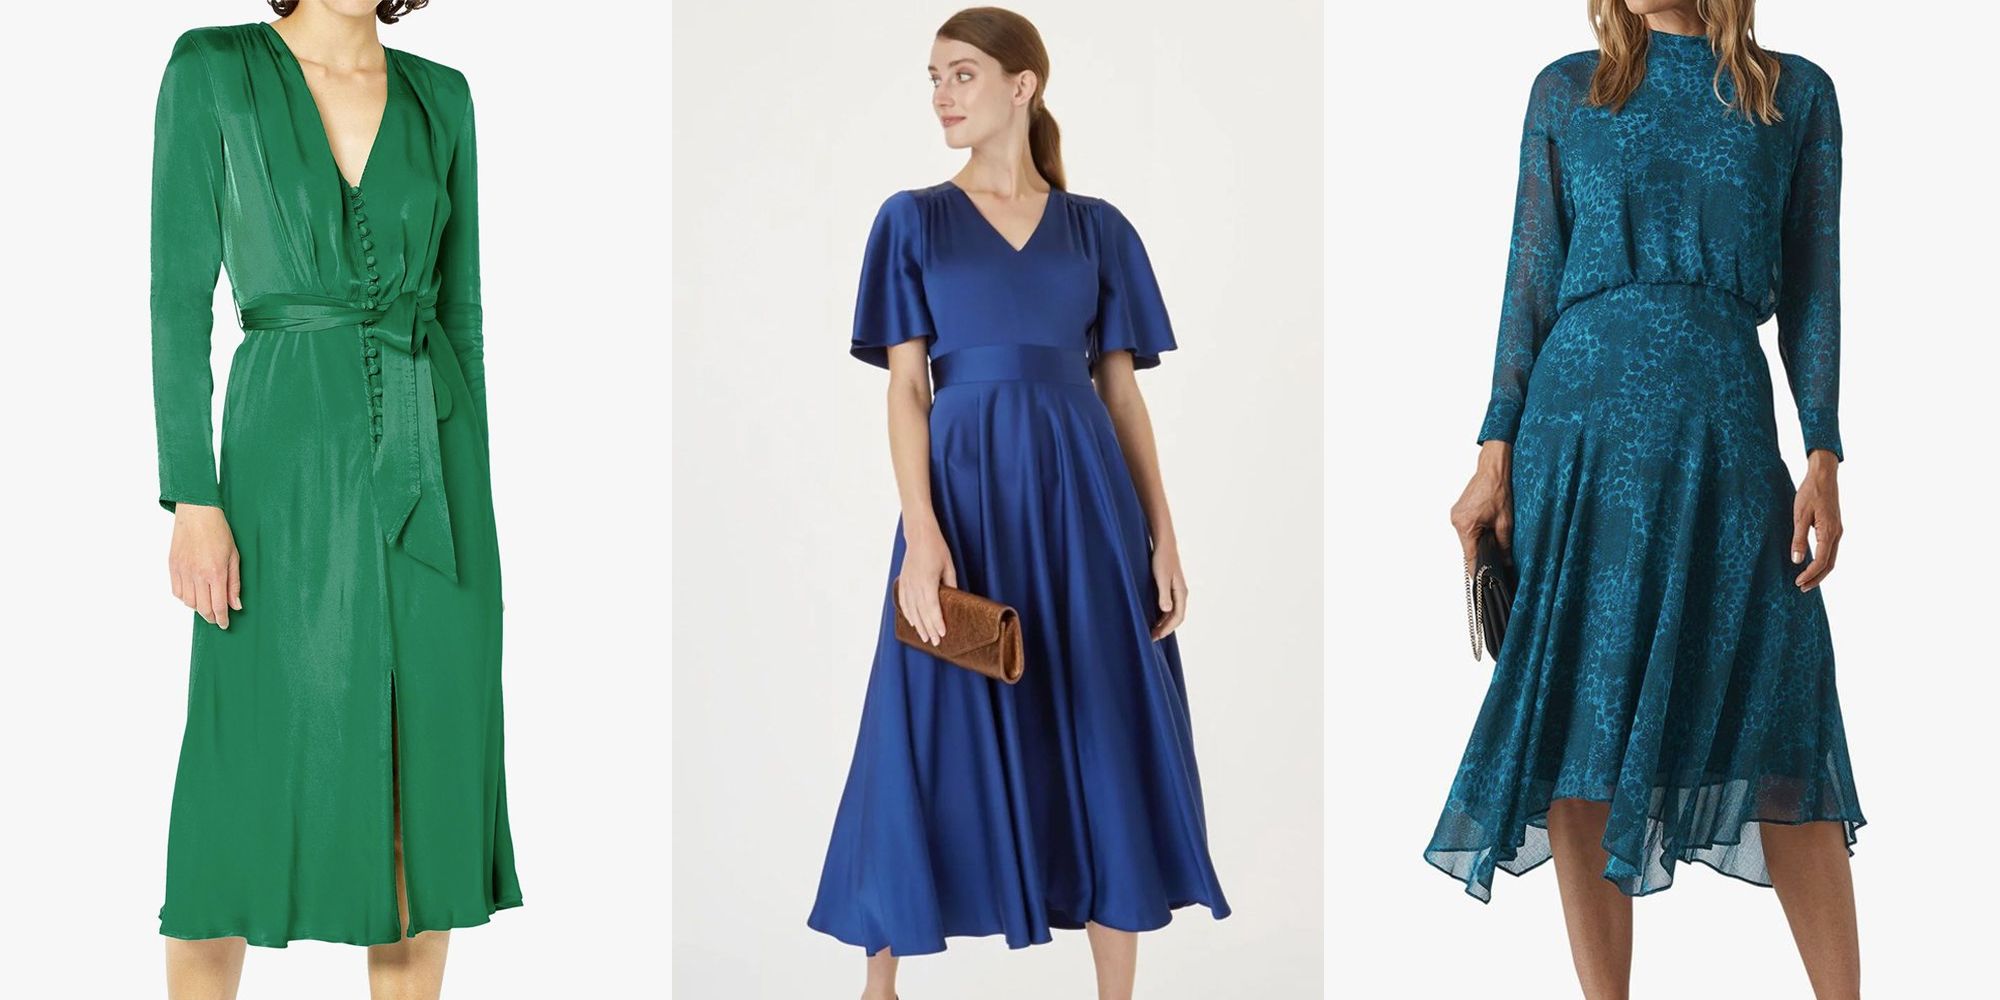 long wedding guest dresses for fall